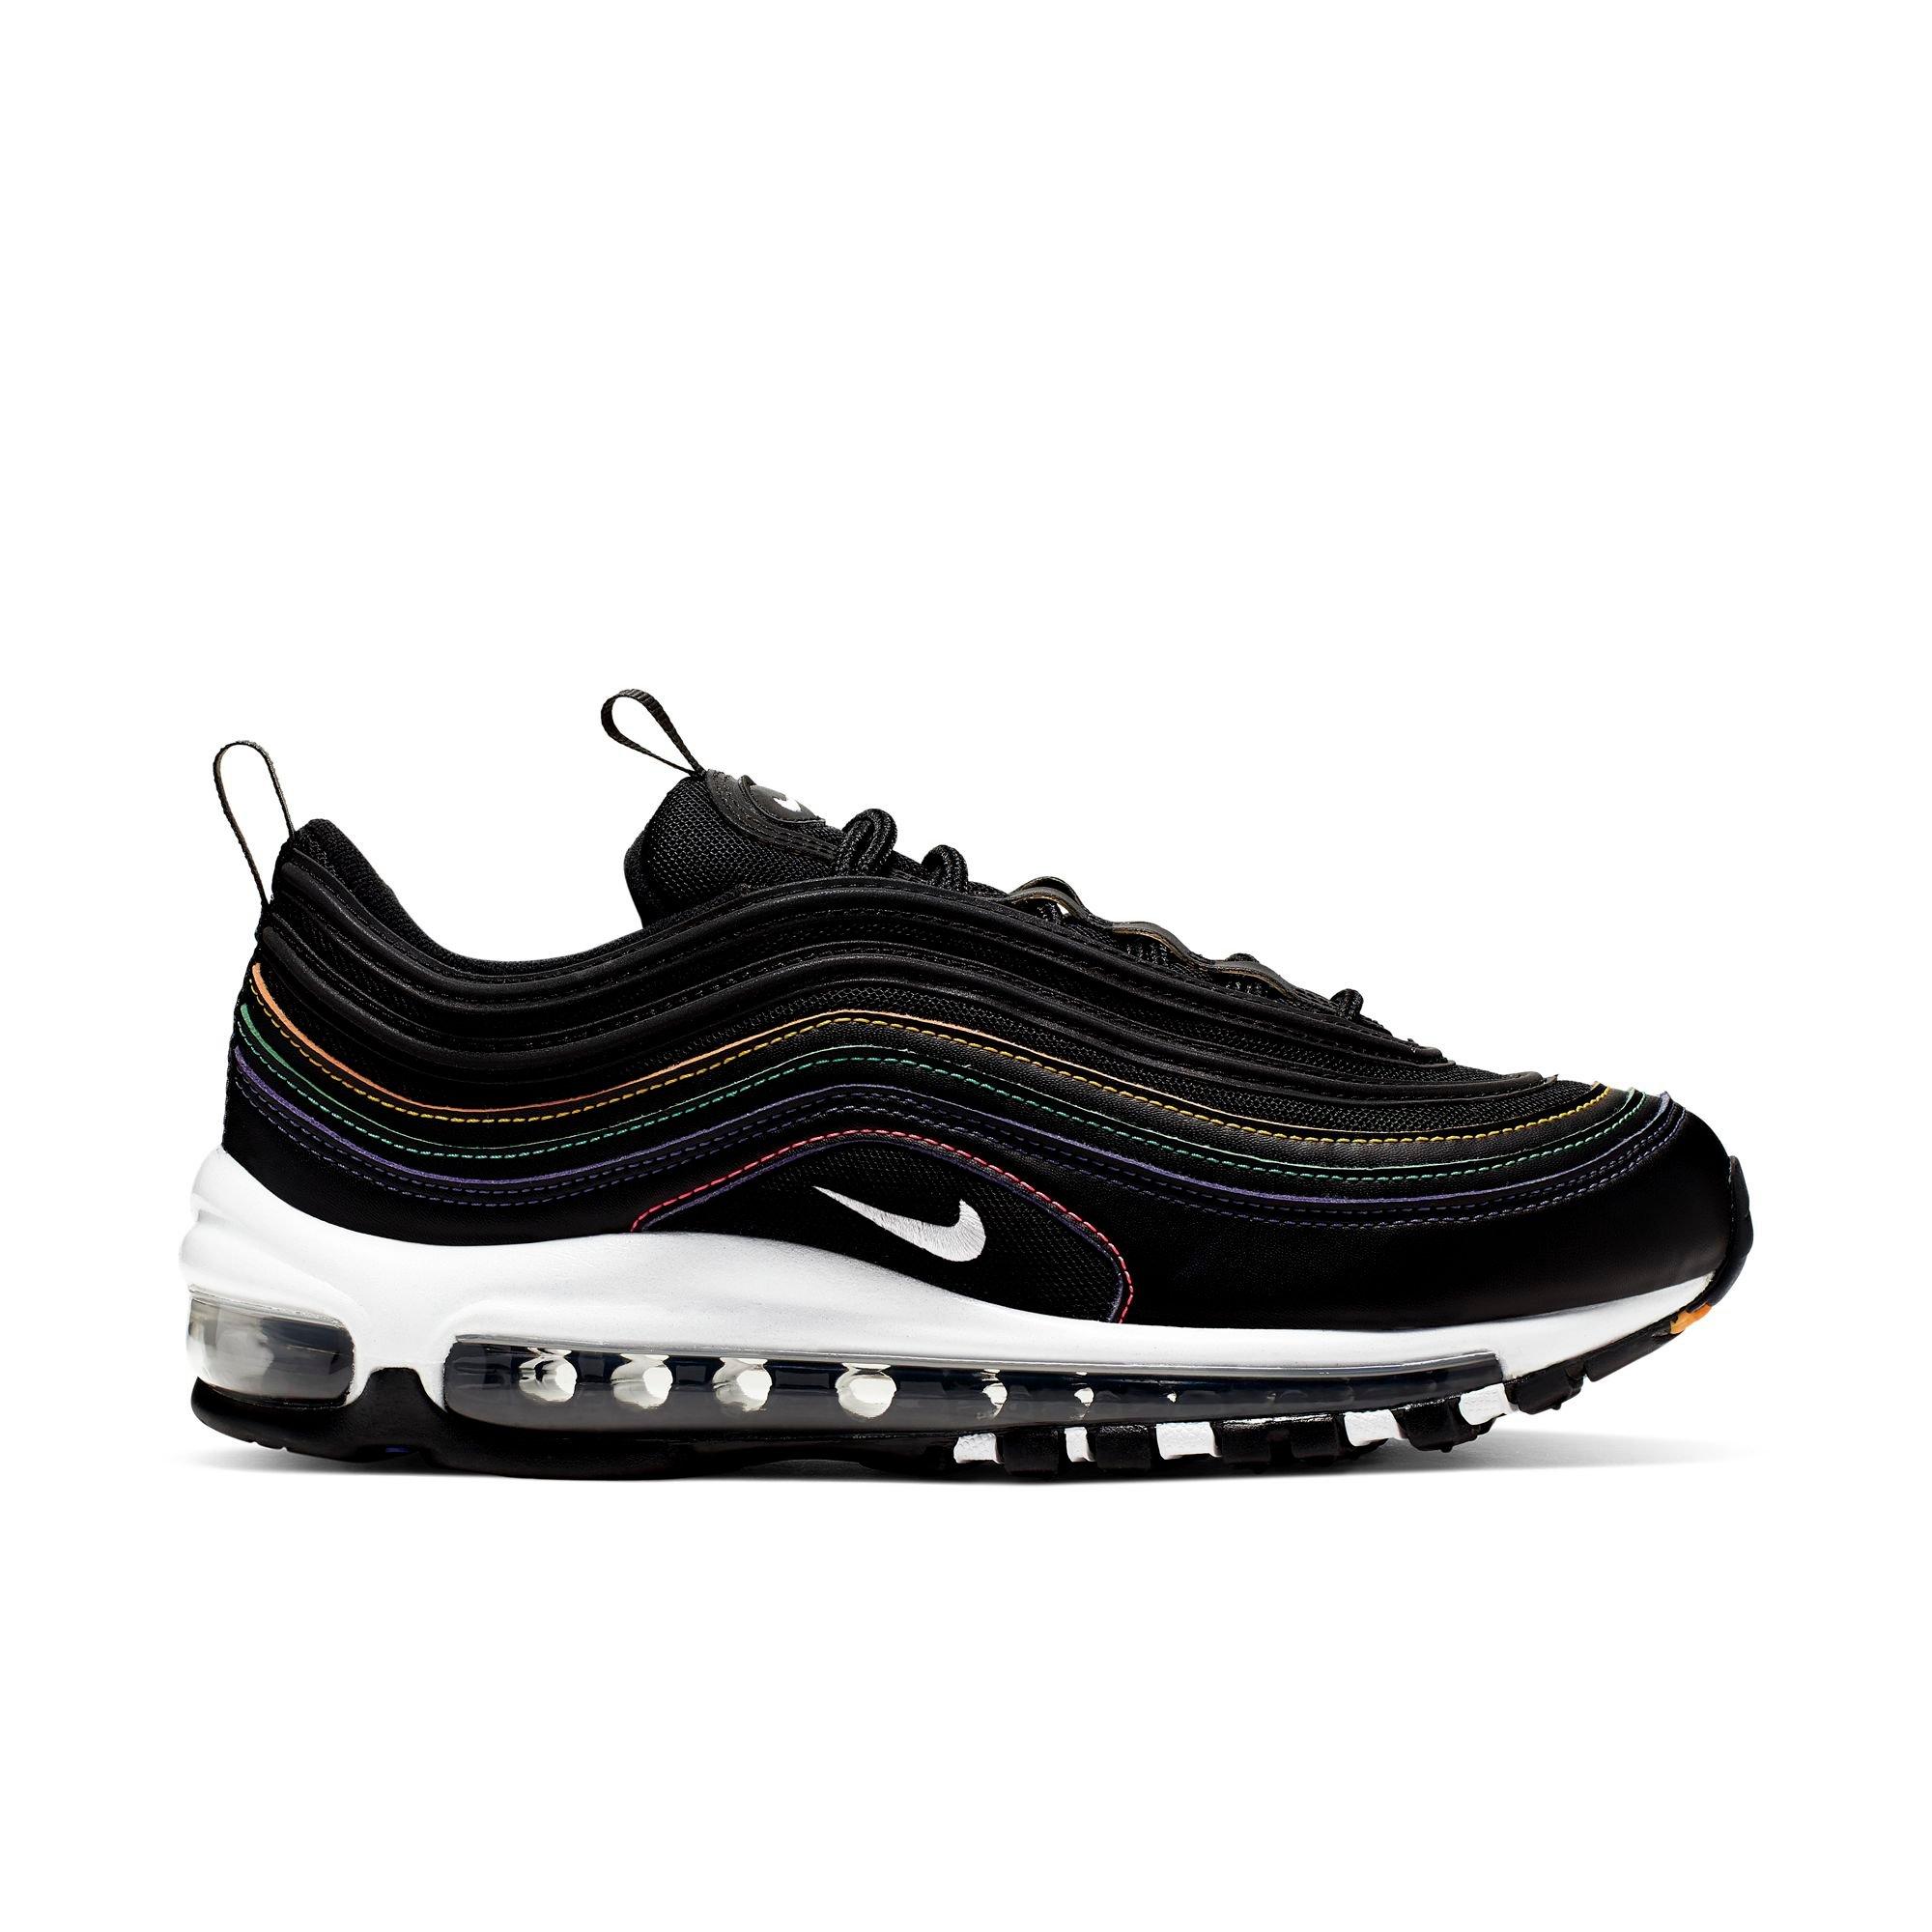 womens black and white 97s